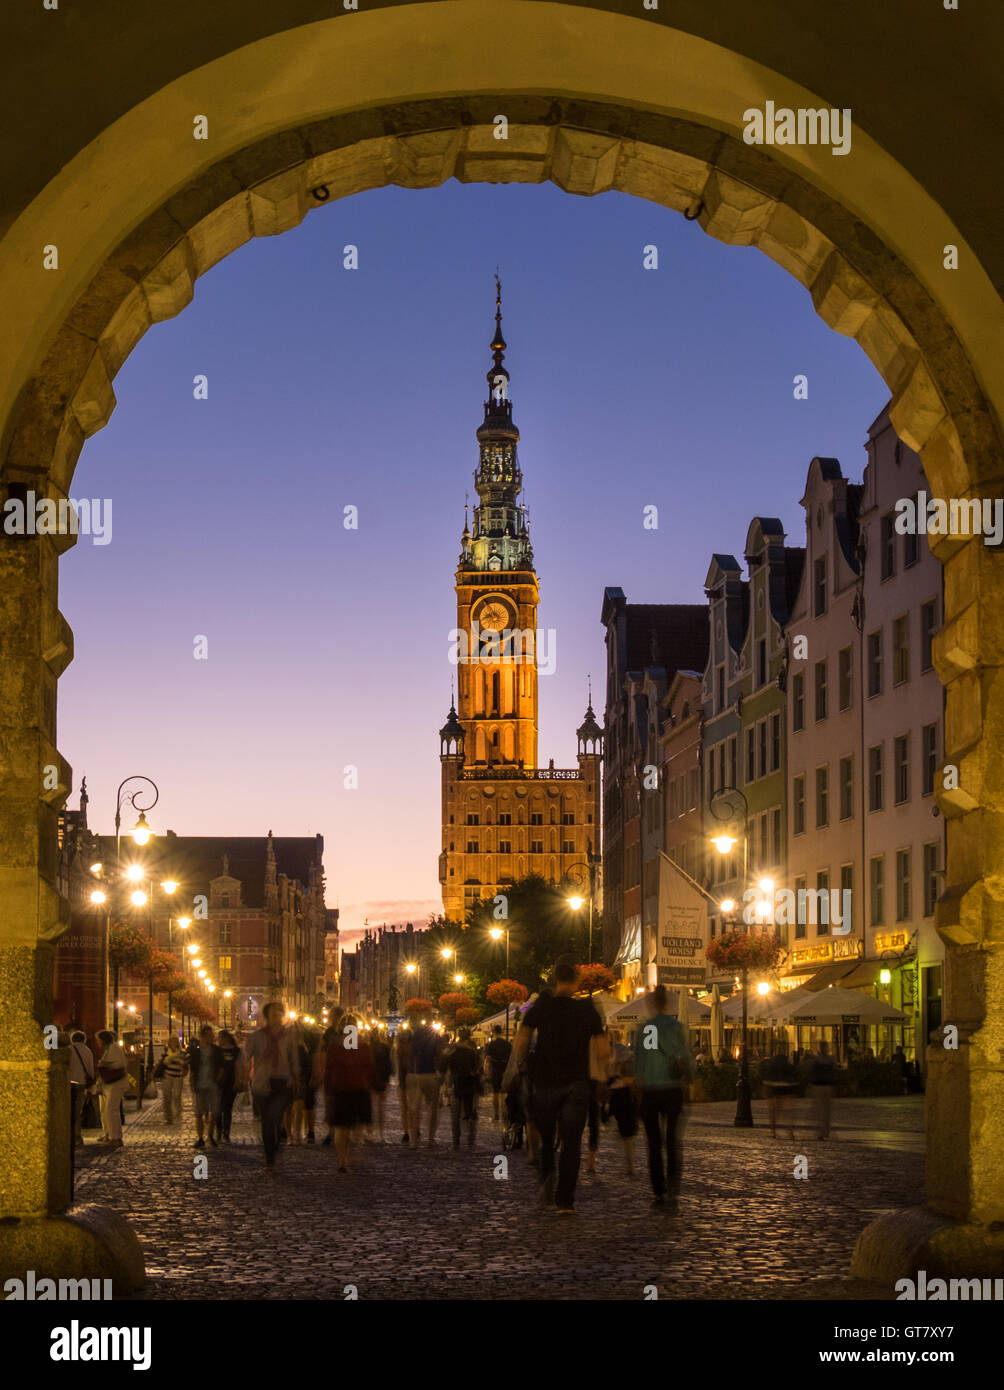 People walking through the arch of the Green Gate on Długa Street in Gdansk's Old Town, with Muzeum Historyczne Miasta Gdańska and Neptune's Fountain Stock Photo